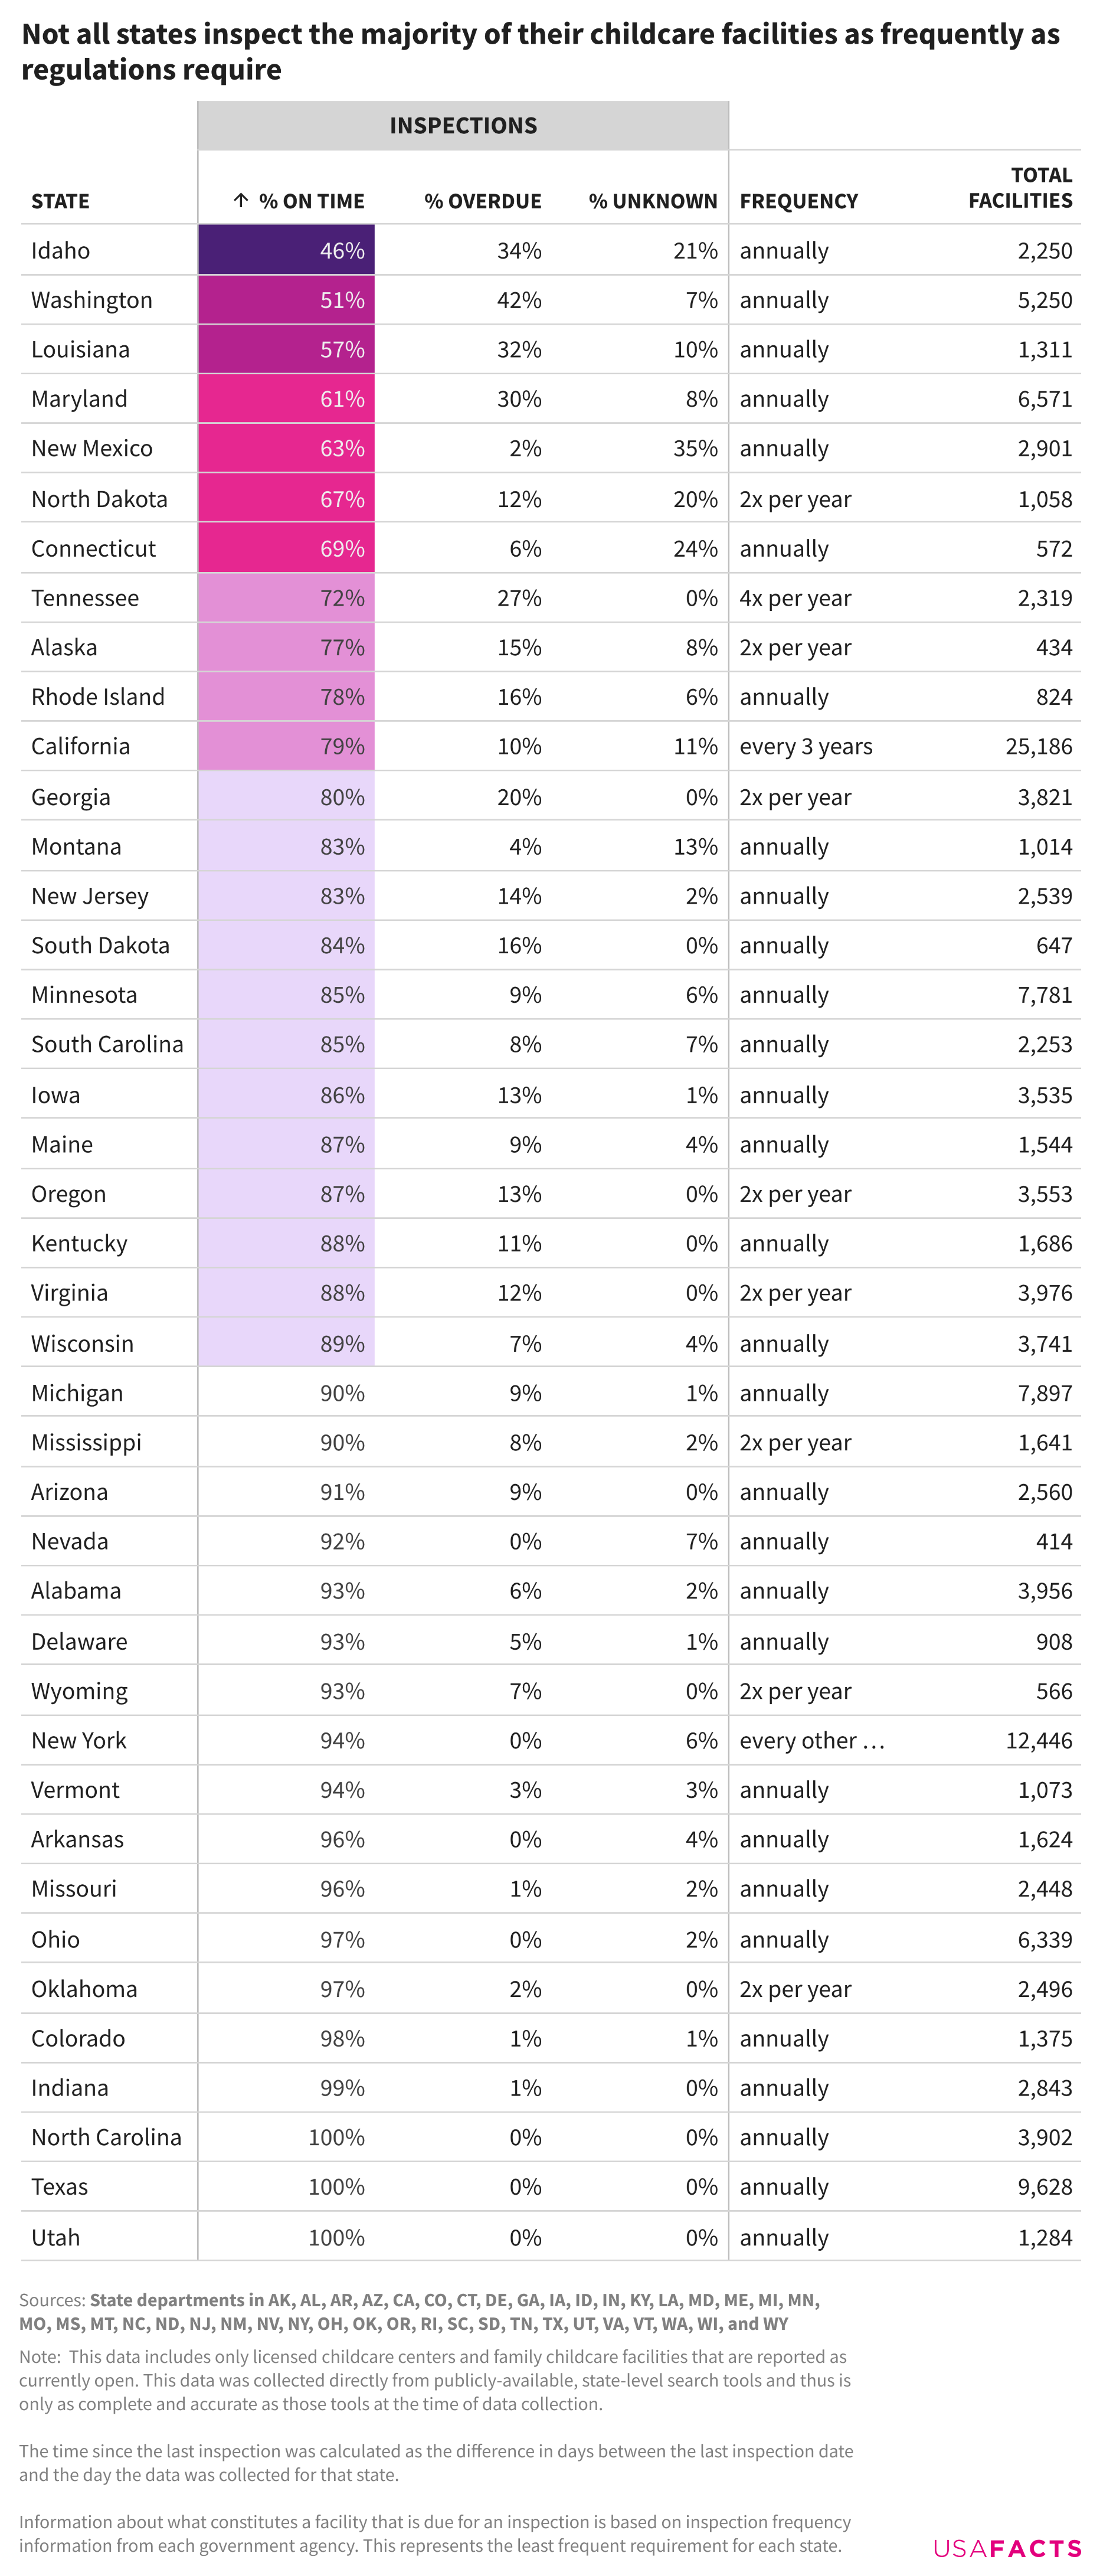 Table displaying data about how often childcare centers are required to be inspected in 41 states and what percentage of those facilities have been inspected on time. MN had the fewest facilities inspected on time (11%) while NC, OK, TX and UT all inspected 100% of their facilities on time.